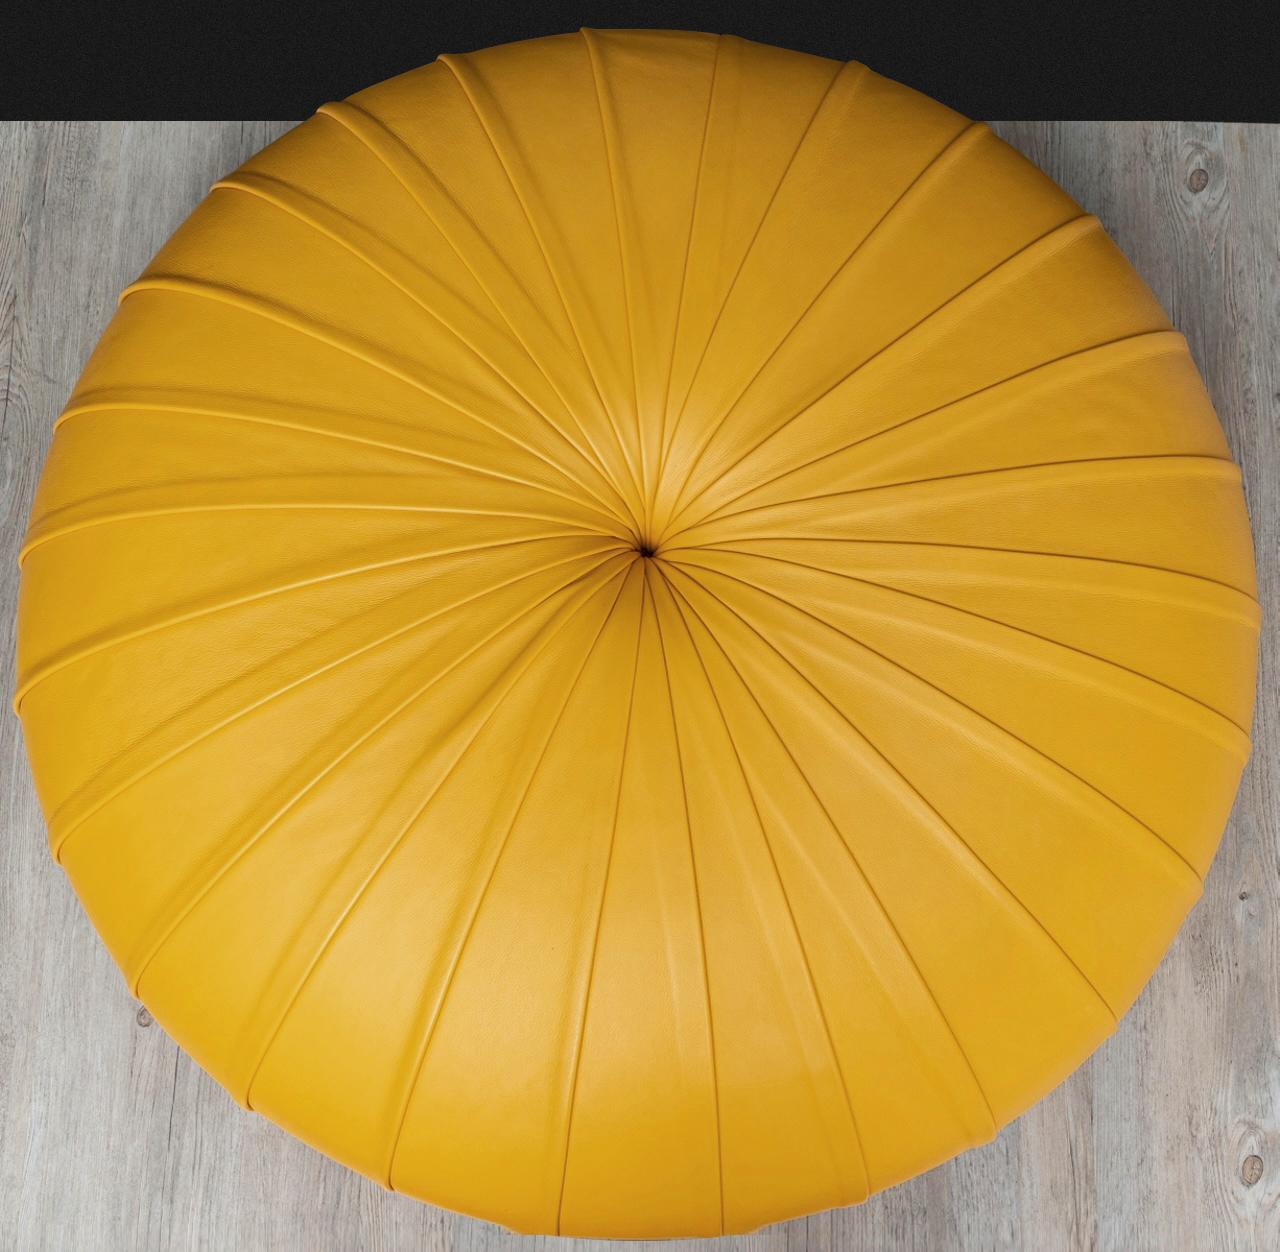 Large round Esedra Ottoman design by Monica Förster.

Edition made in yellow Pelle leather by Poltrona Frau in 2010.

The Esedra ottoman model is only available on 5 month order in Poltrona Frau factory.

Very good condition.

D. 100cm x H.